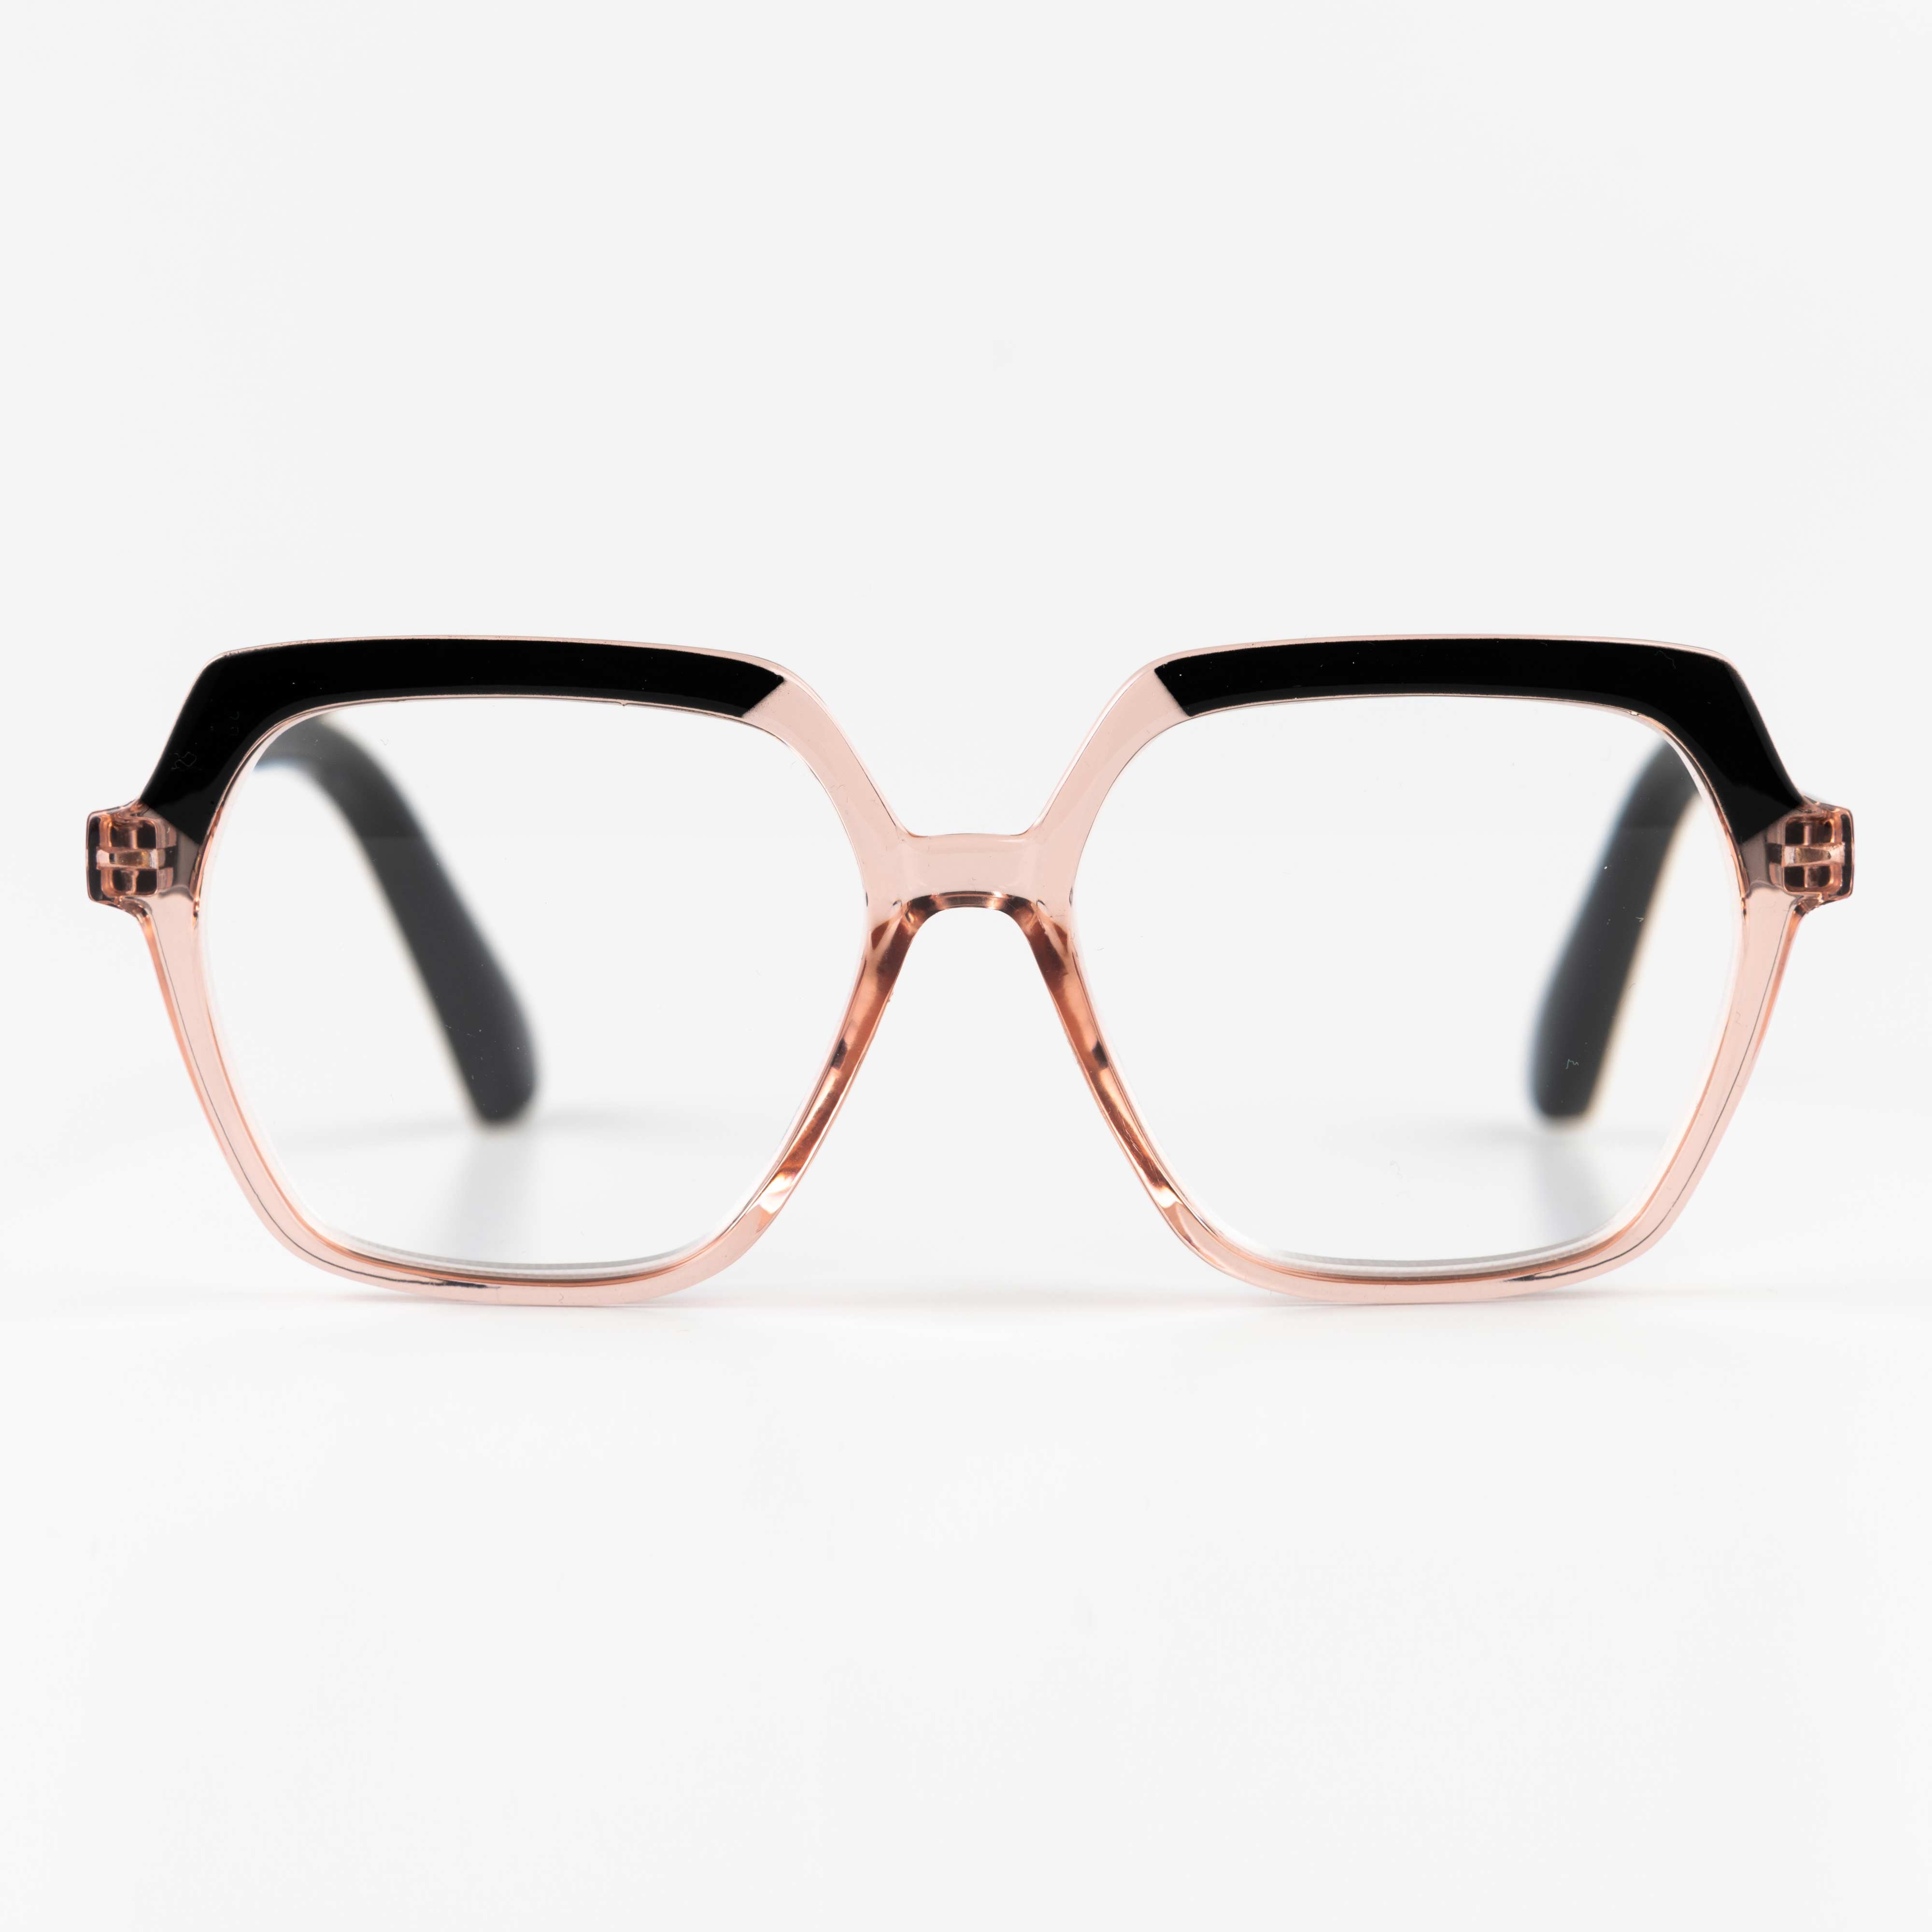 Beige and black square reading glasses